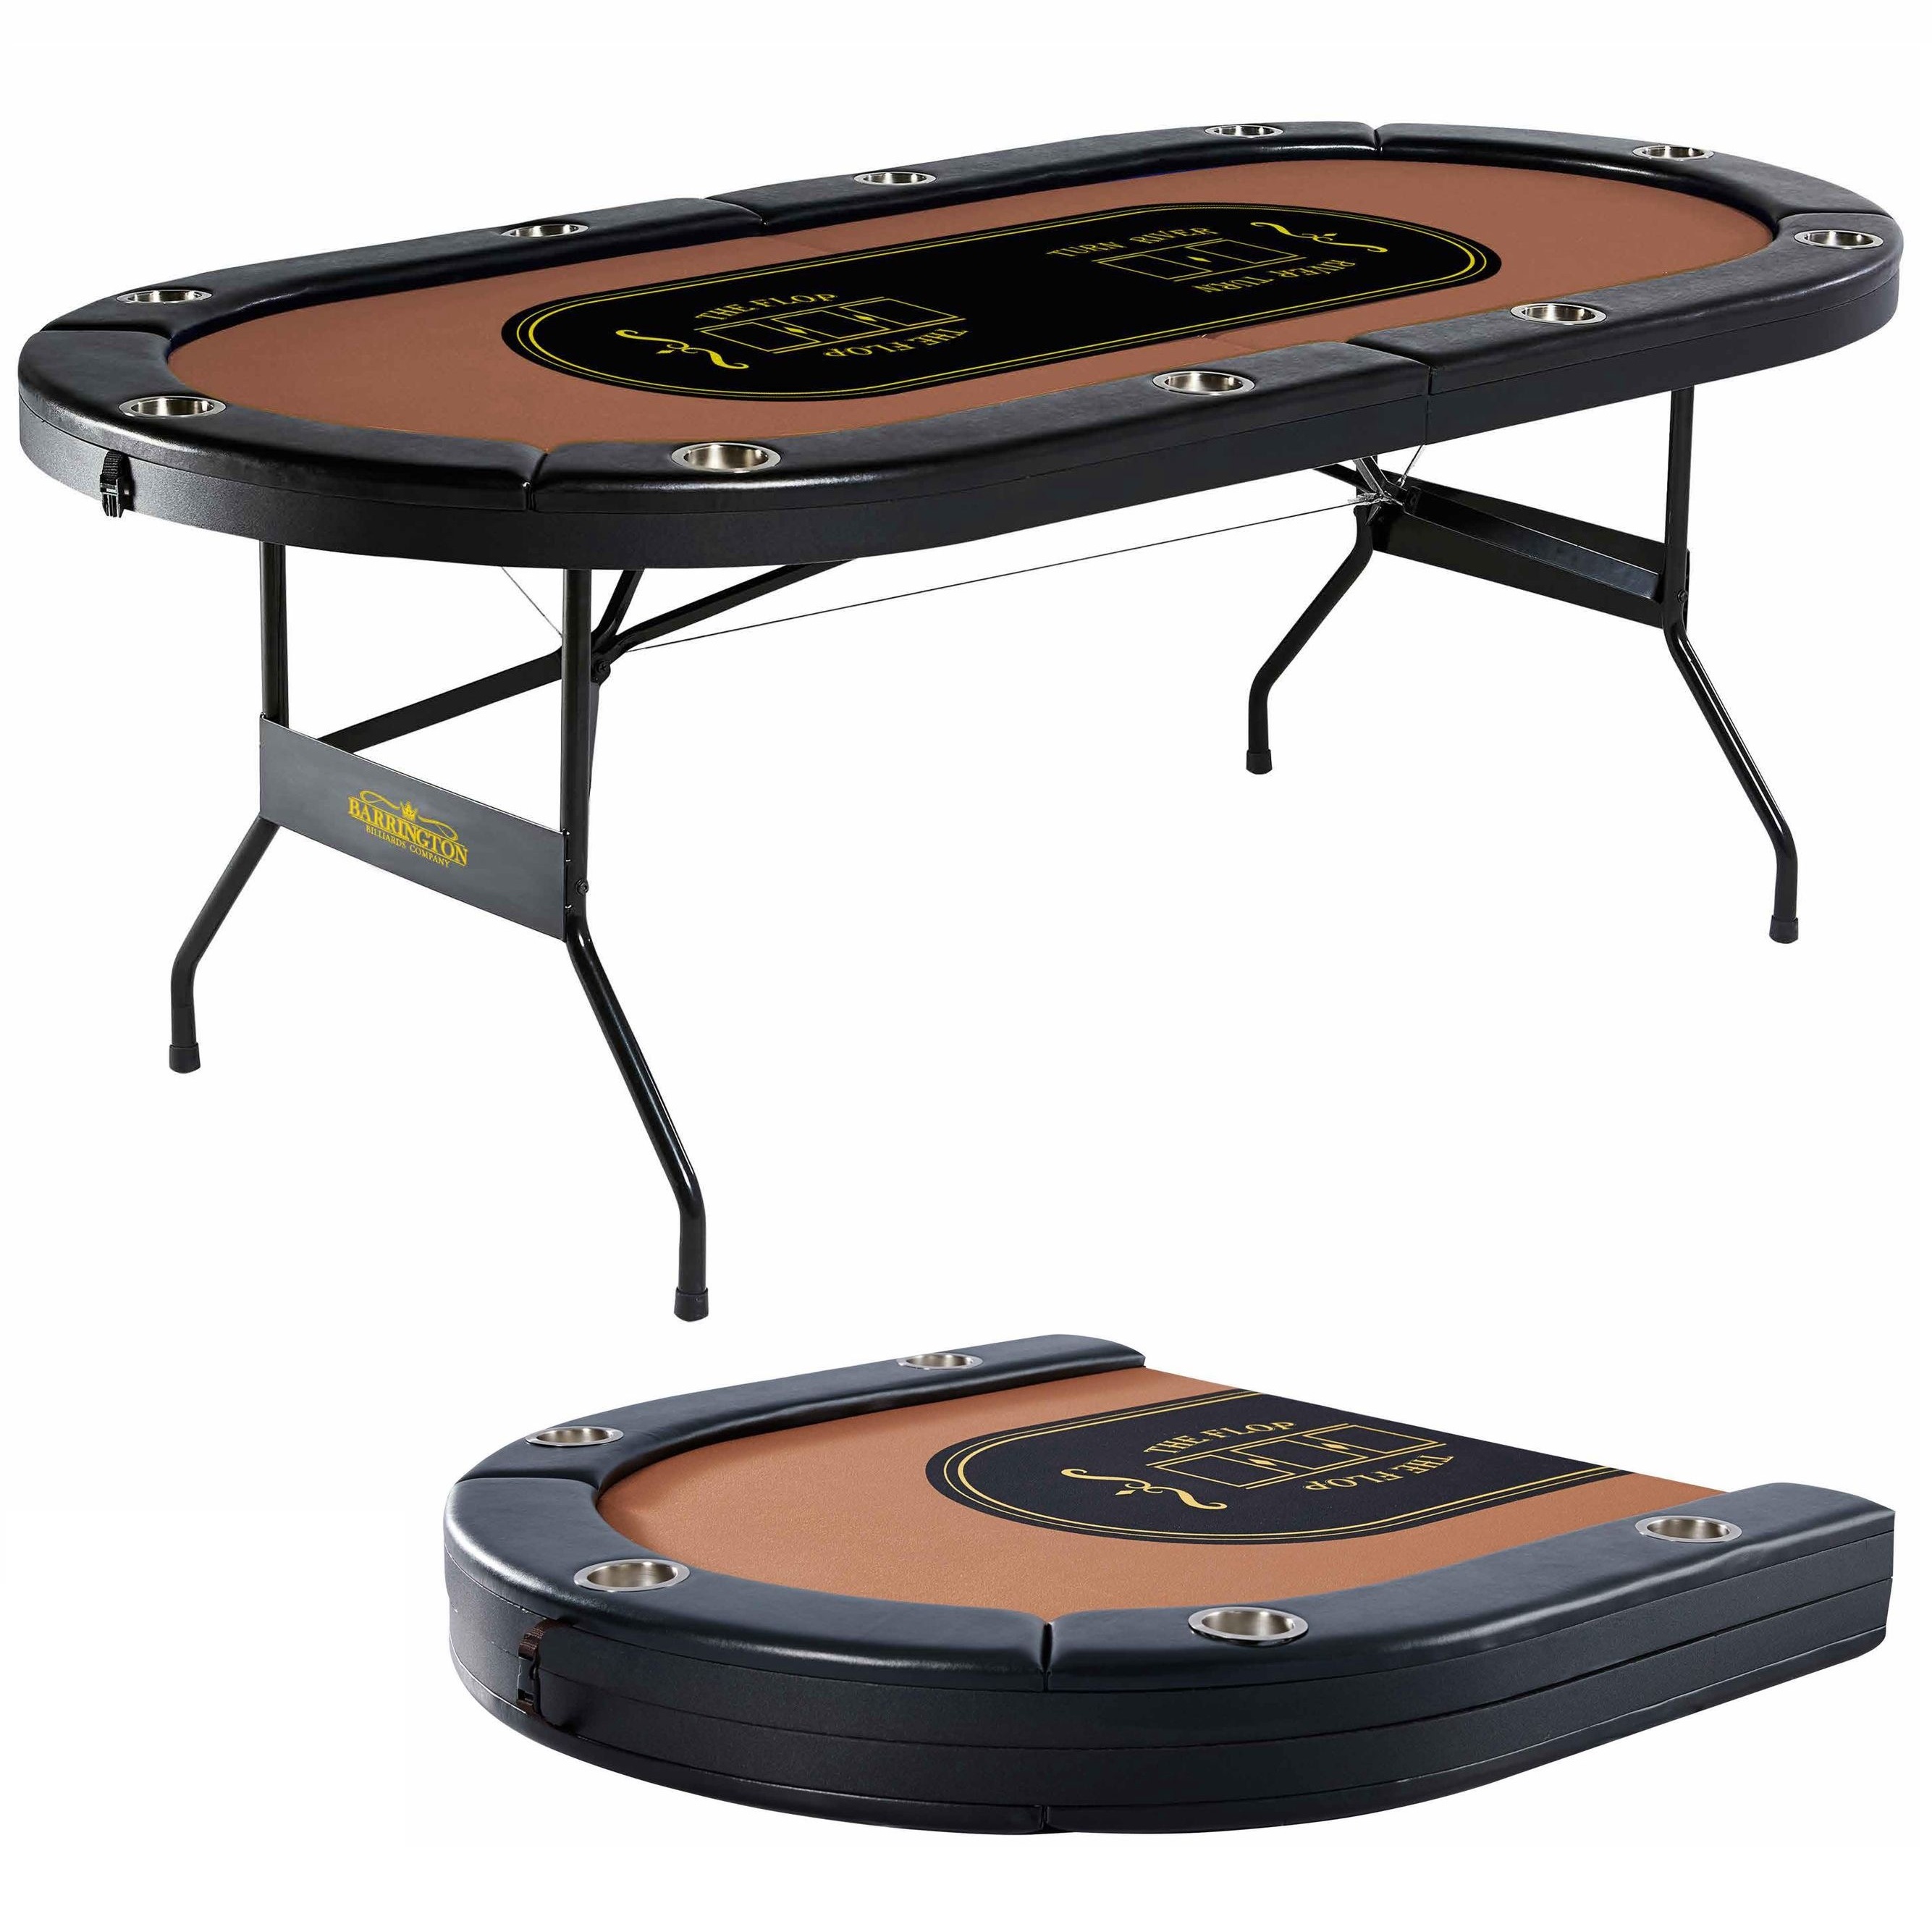 Barrington 10-Player Poker Table, No Assembly Required - image 1 of 9